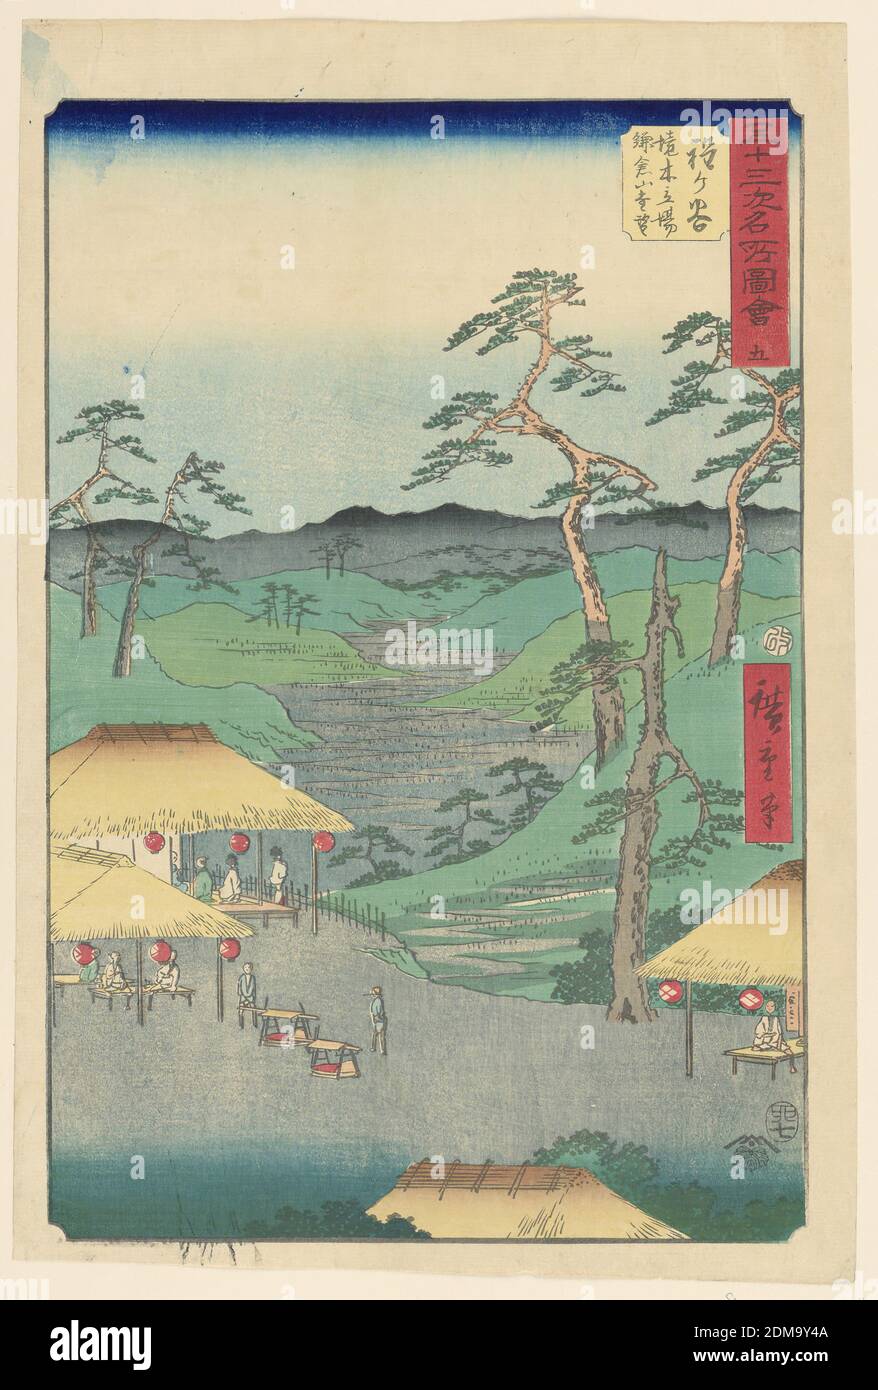 Valley View, Ando Hiroshige, Japanese, 1797–1858, Woodblock print in colored ink on paper, Hiroshige's eye-catching folded valley leads the viewer's eye to meander towards the front of the print. Here we see four partial huts are lit with lanterns. Beneath them, people are resting on benches or standing outside enjoying the day., Japan, 1797-1858, landscapes, Print Stock Photo